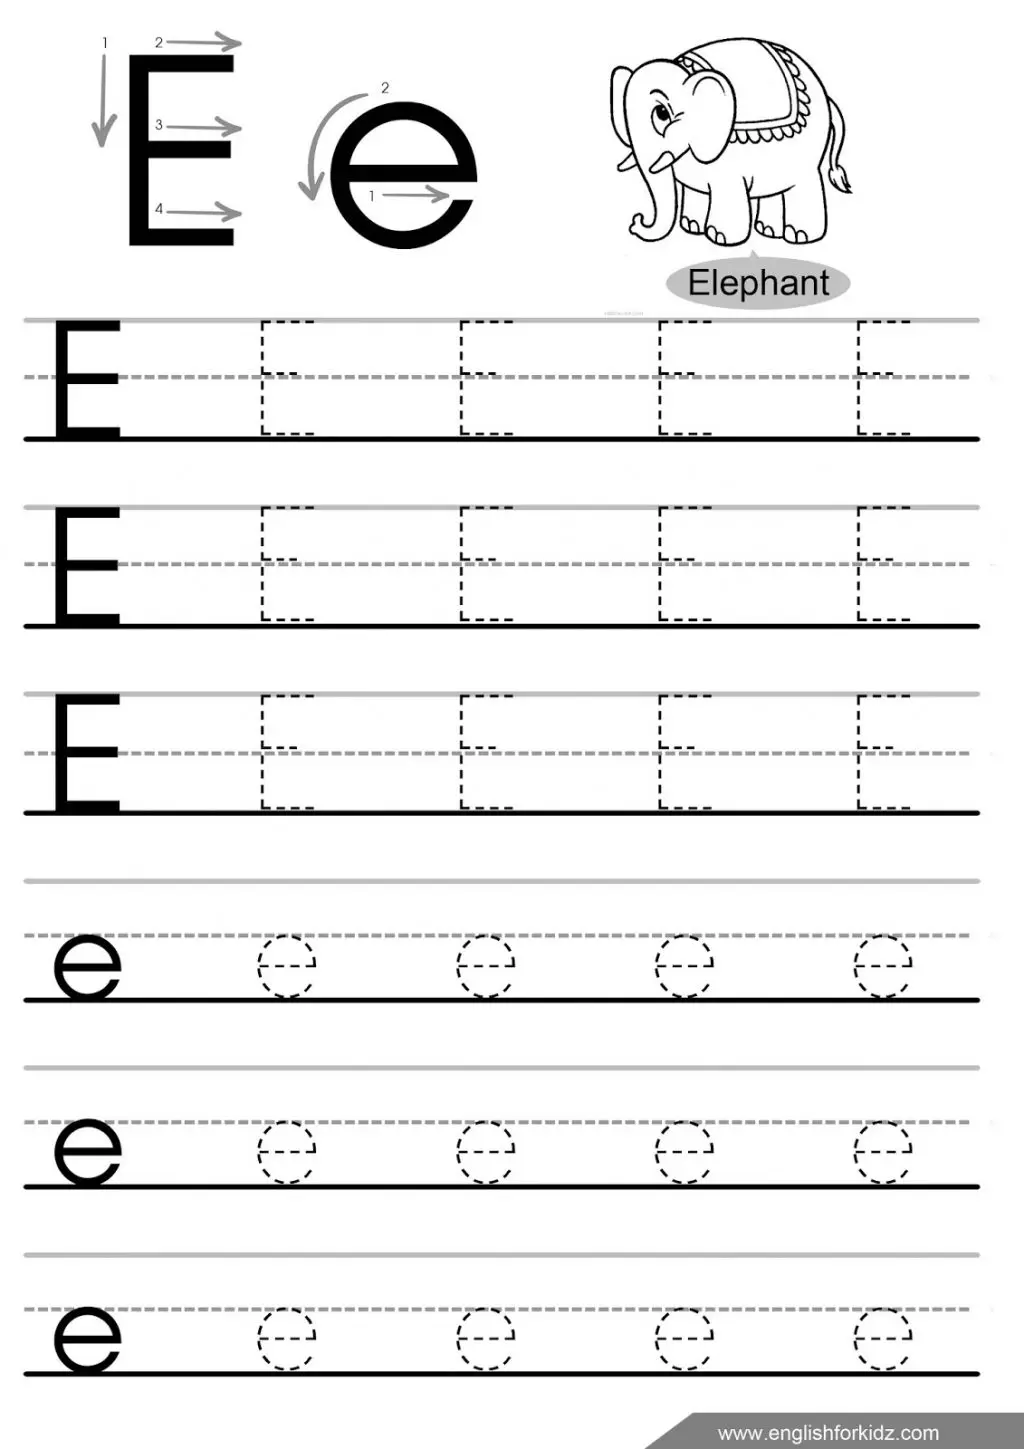 32 Fun Letter E Worksheets | KittyBabyLove.com